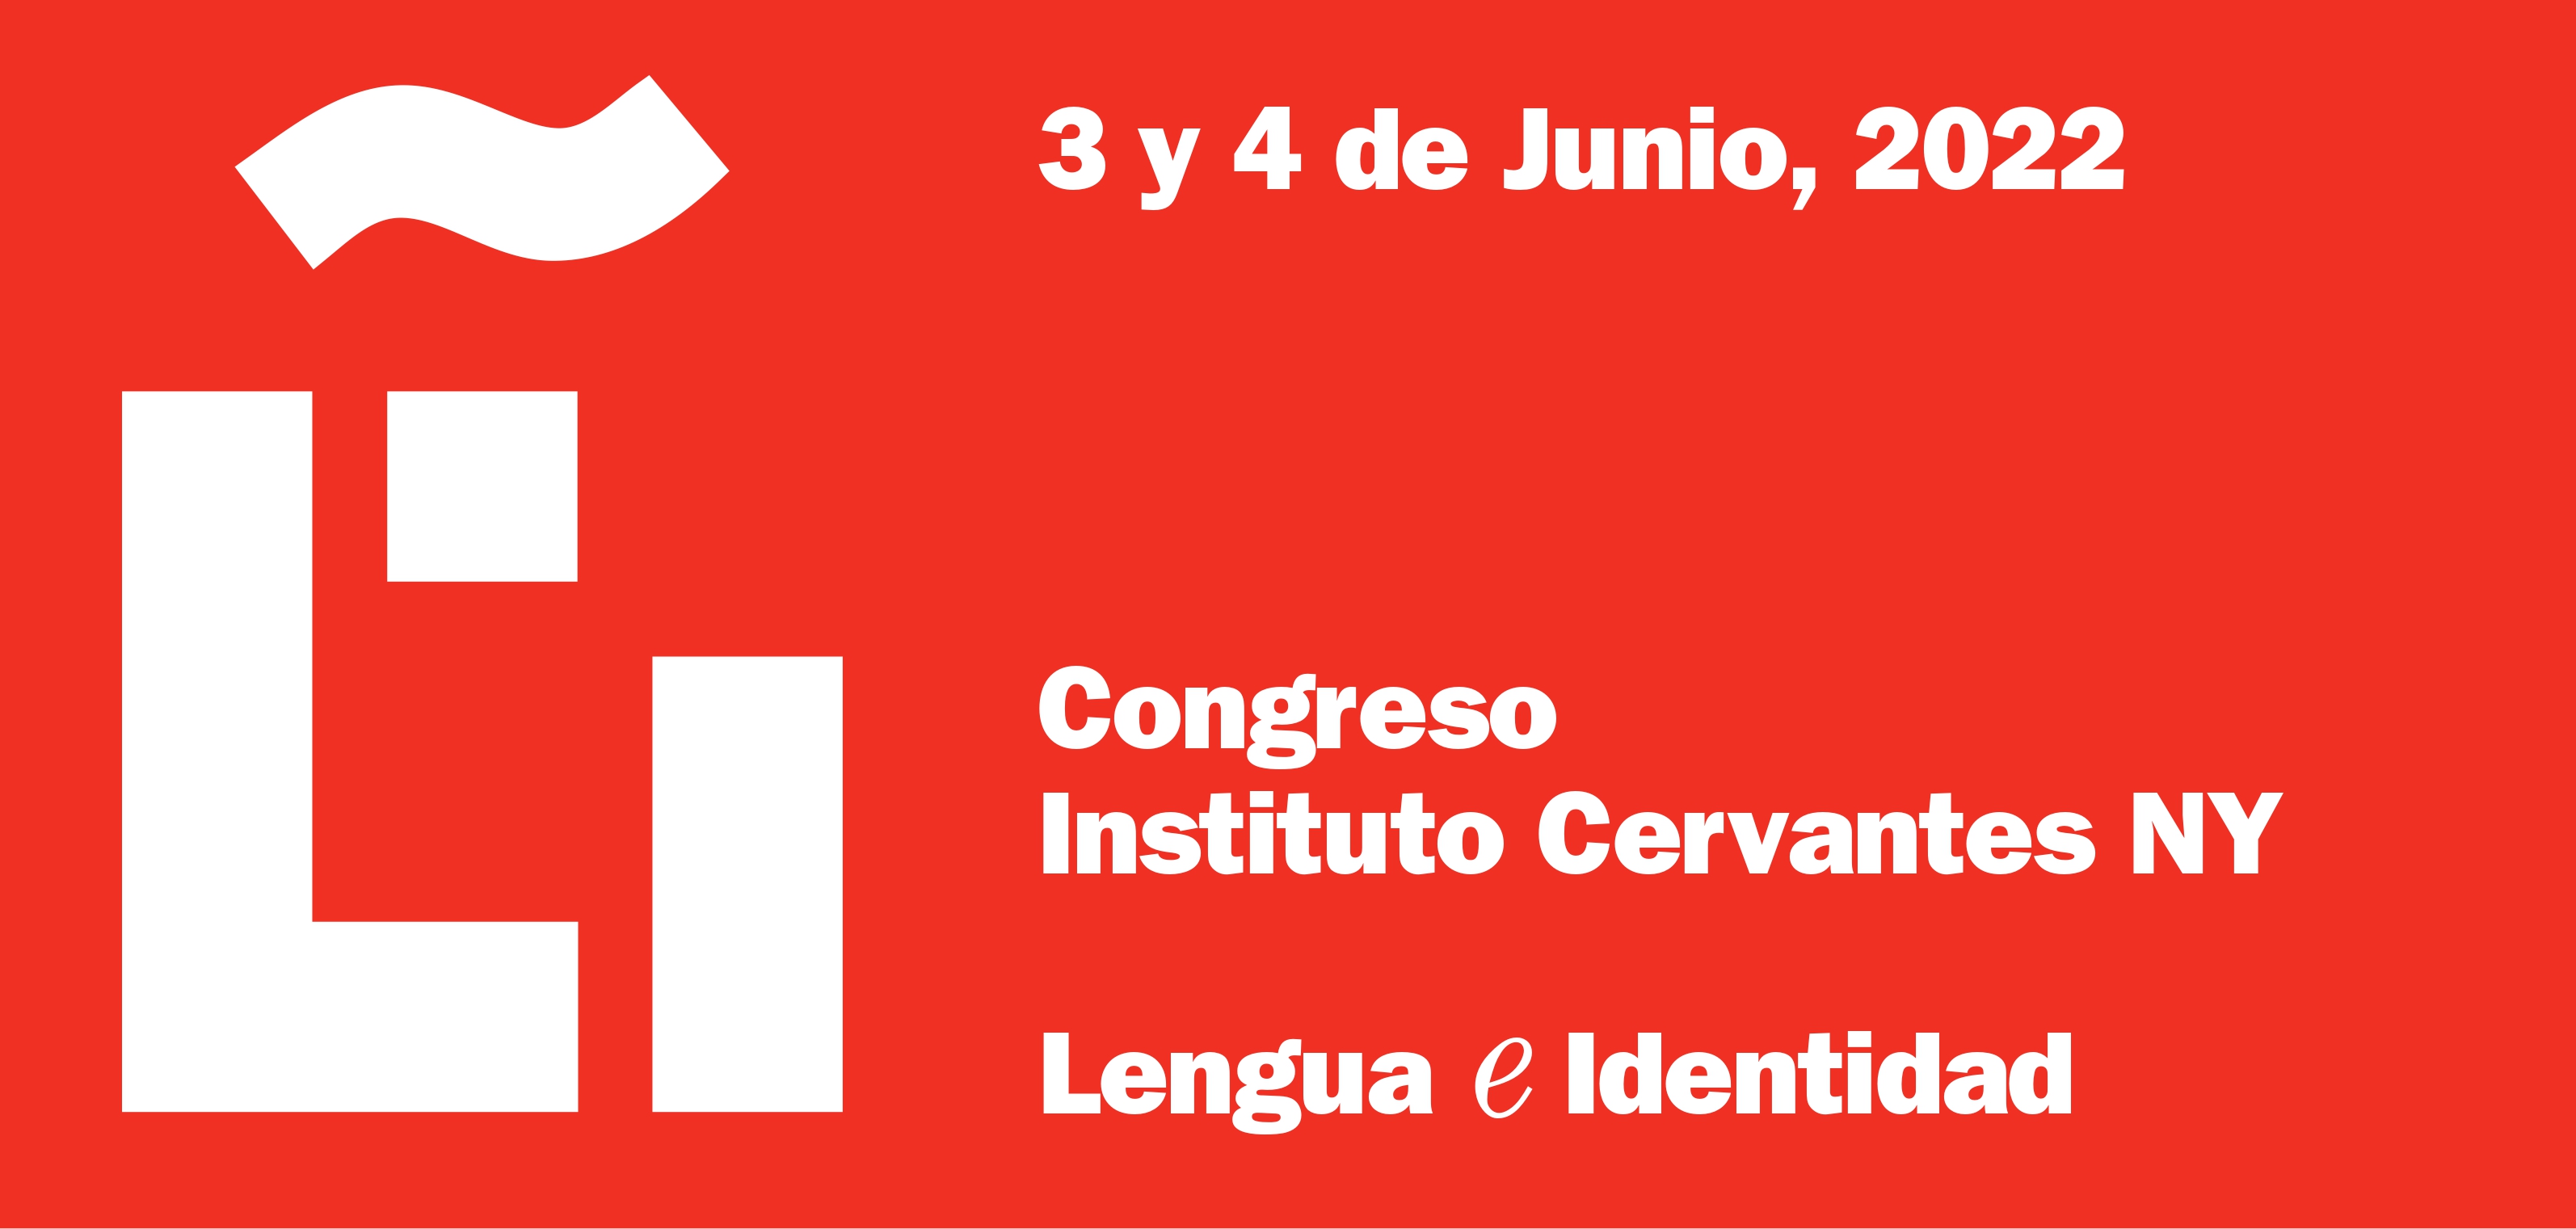 The First Annual Congress of the Instituto Cervantes NY: 